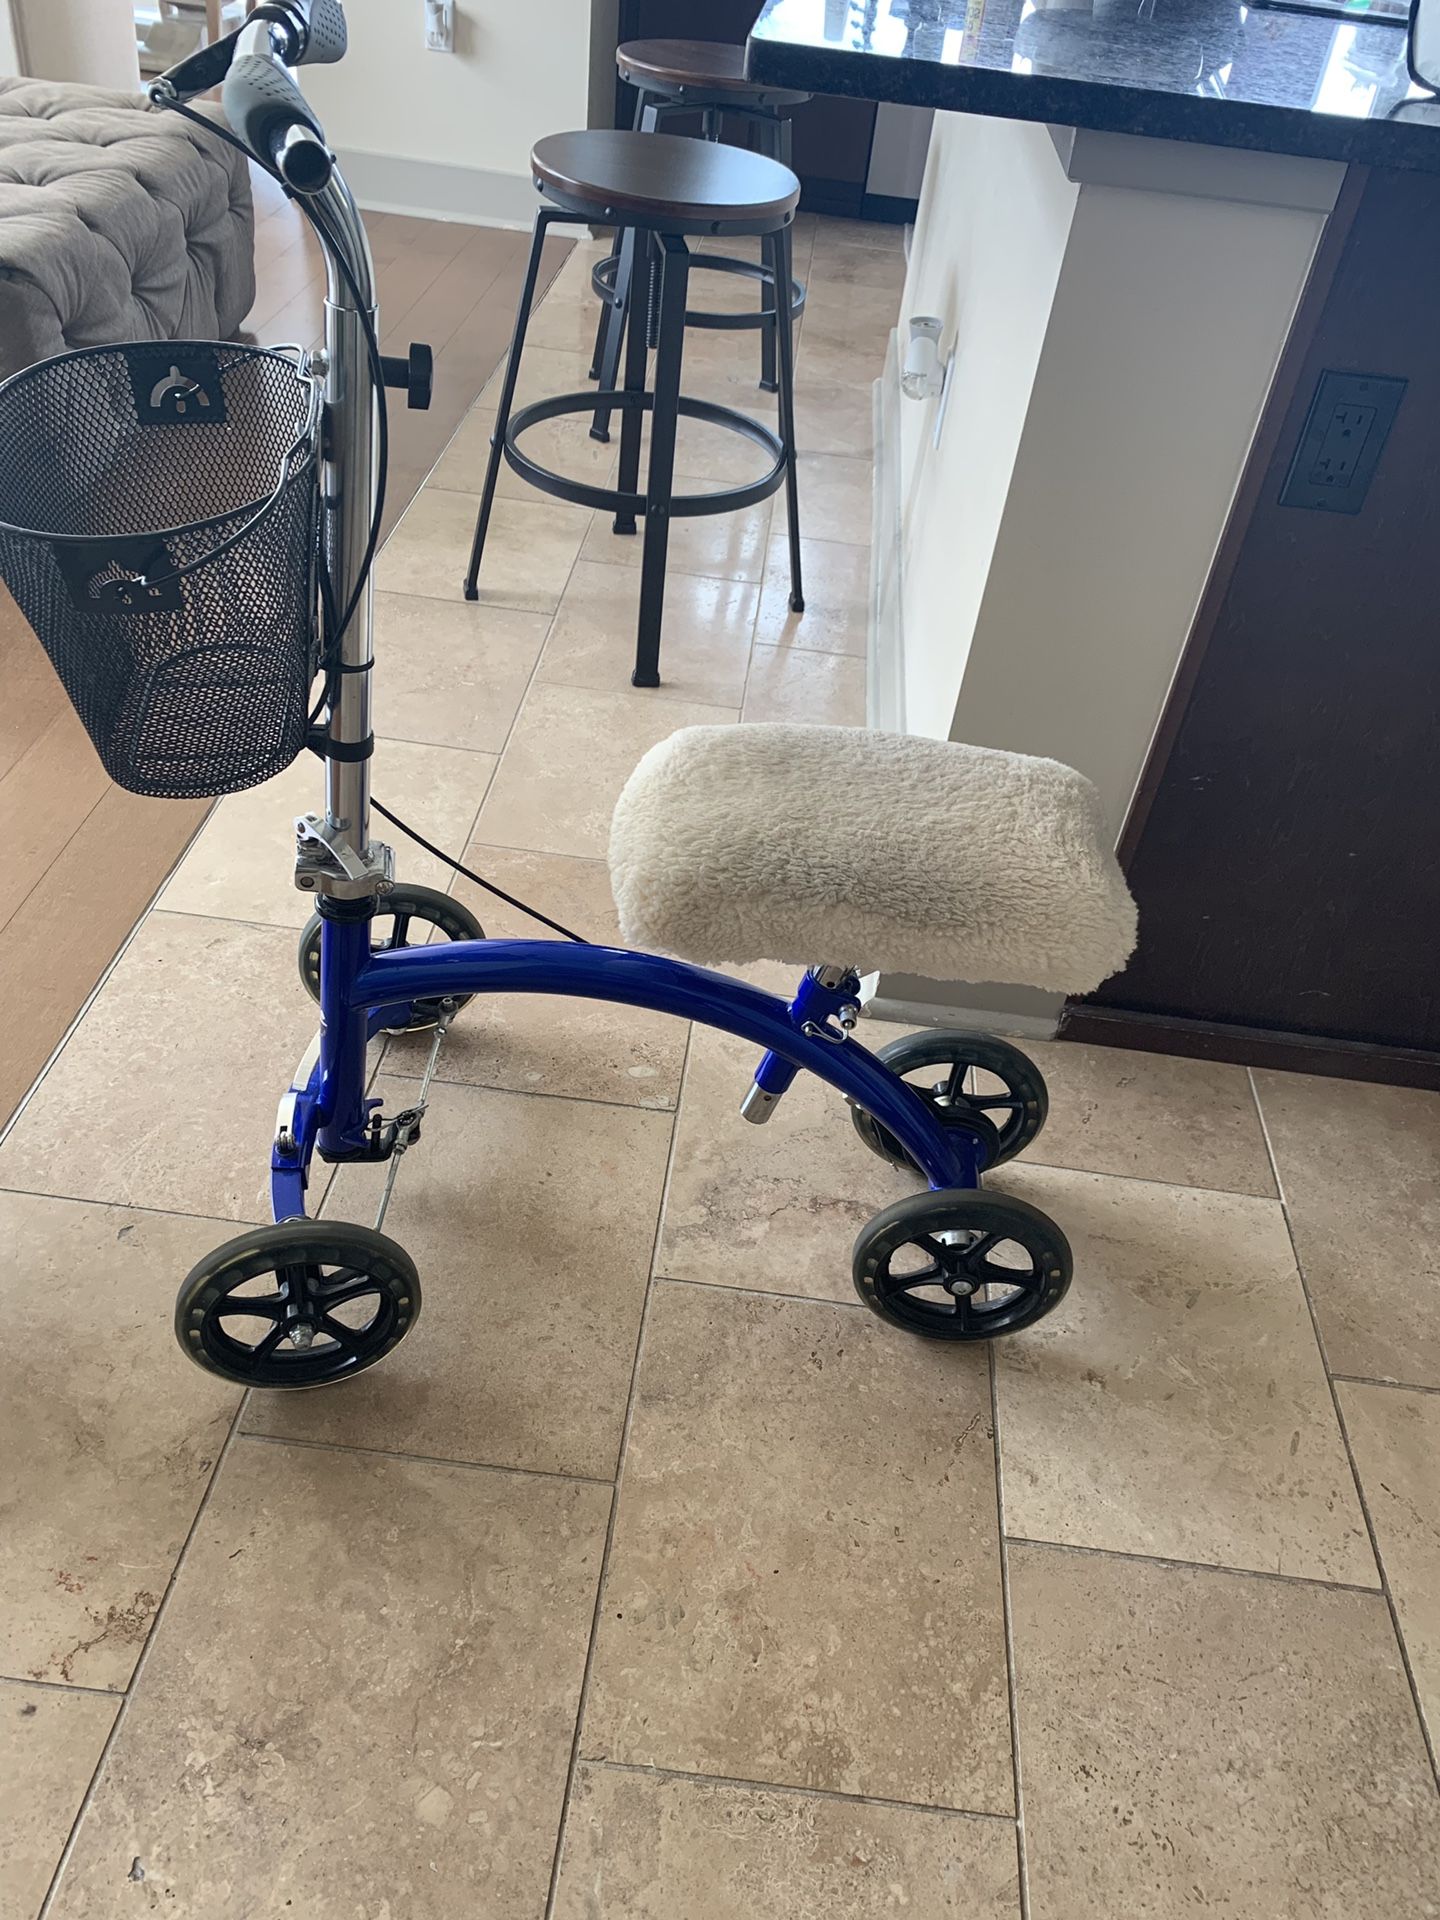 Knee scooter with removable basket and sheepskin cover